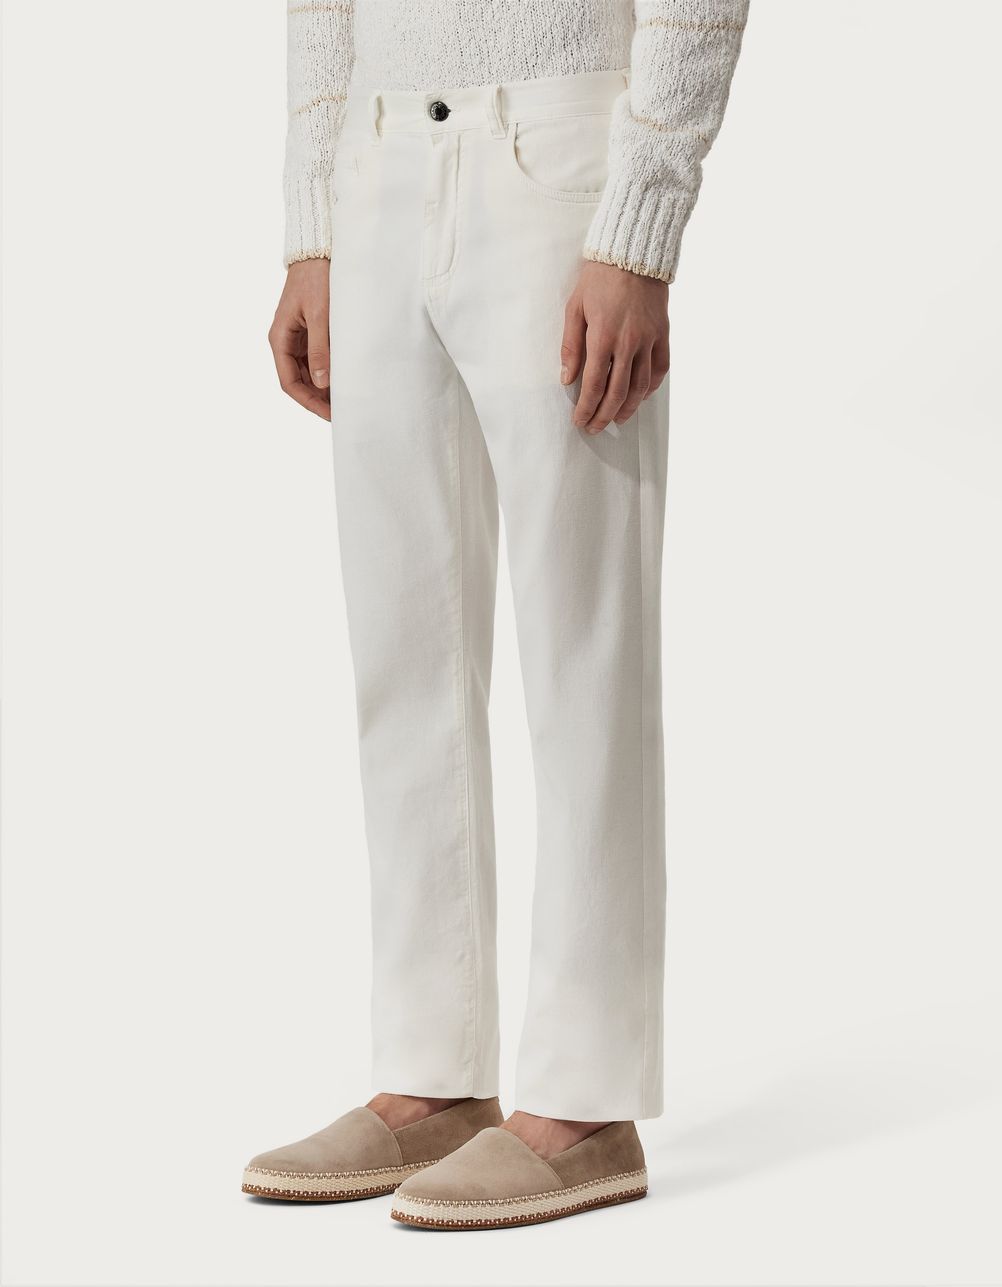 Regular-fit five-pocket trousers in a white garment-dyed microtwill cotton